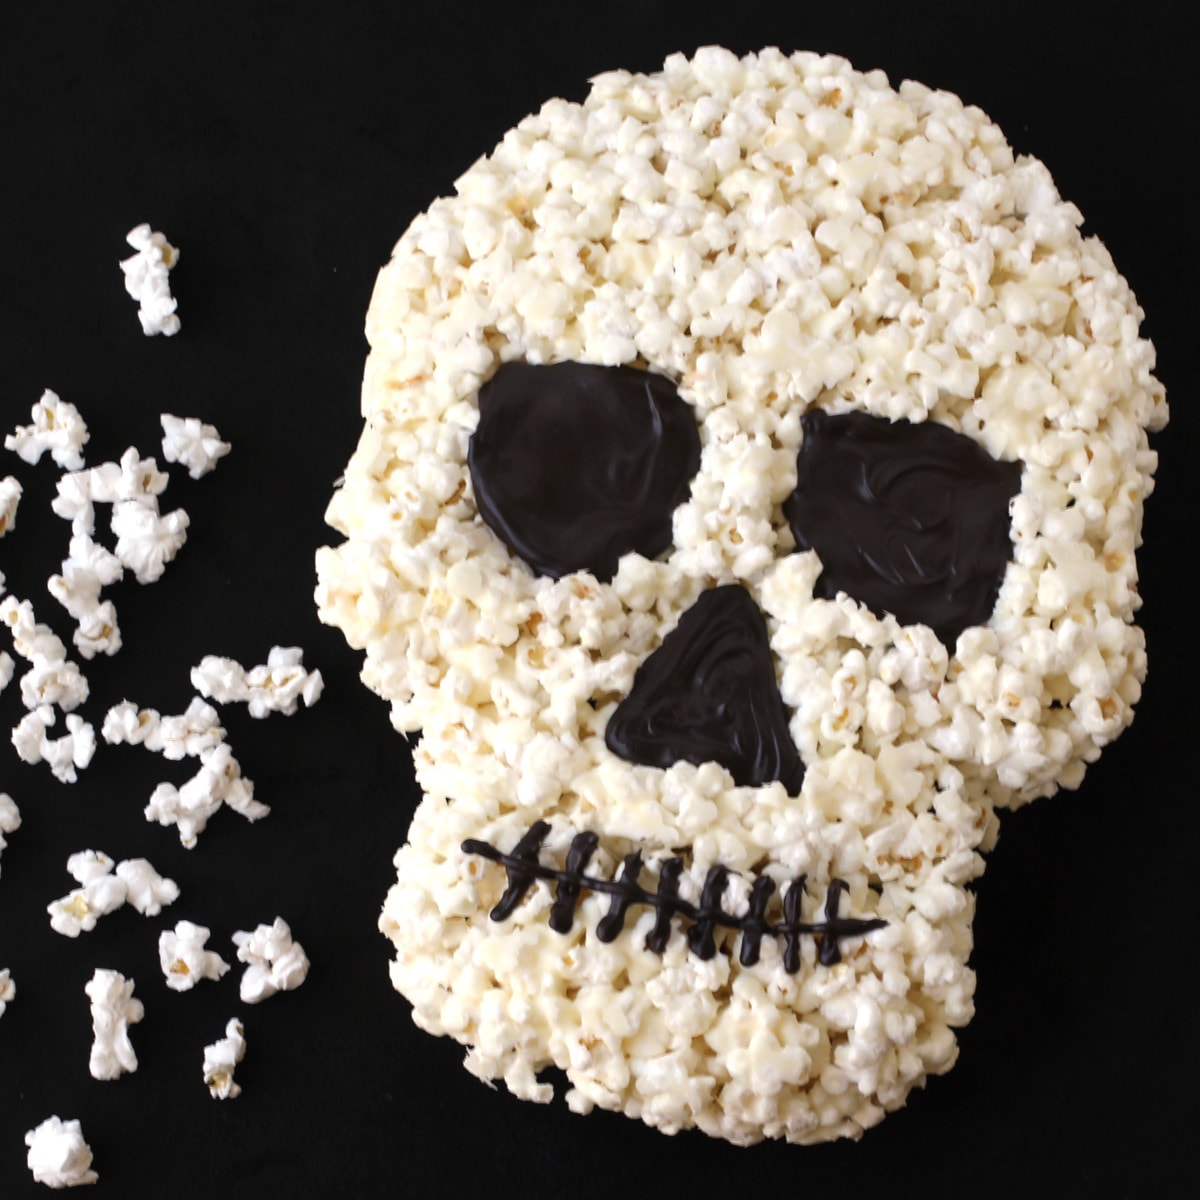 white chocolate popcorn skull on a black background with loose popcorn on the table.